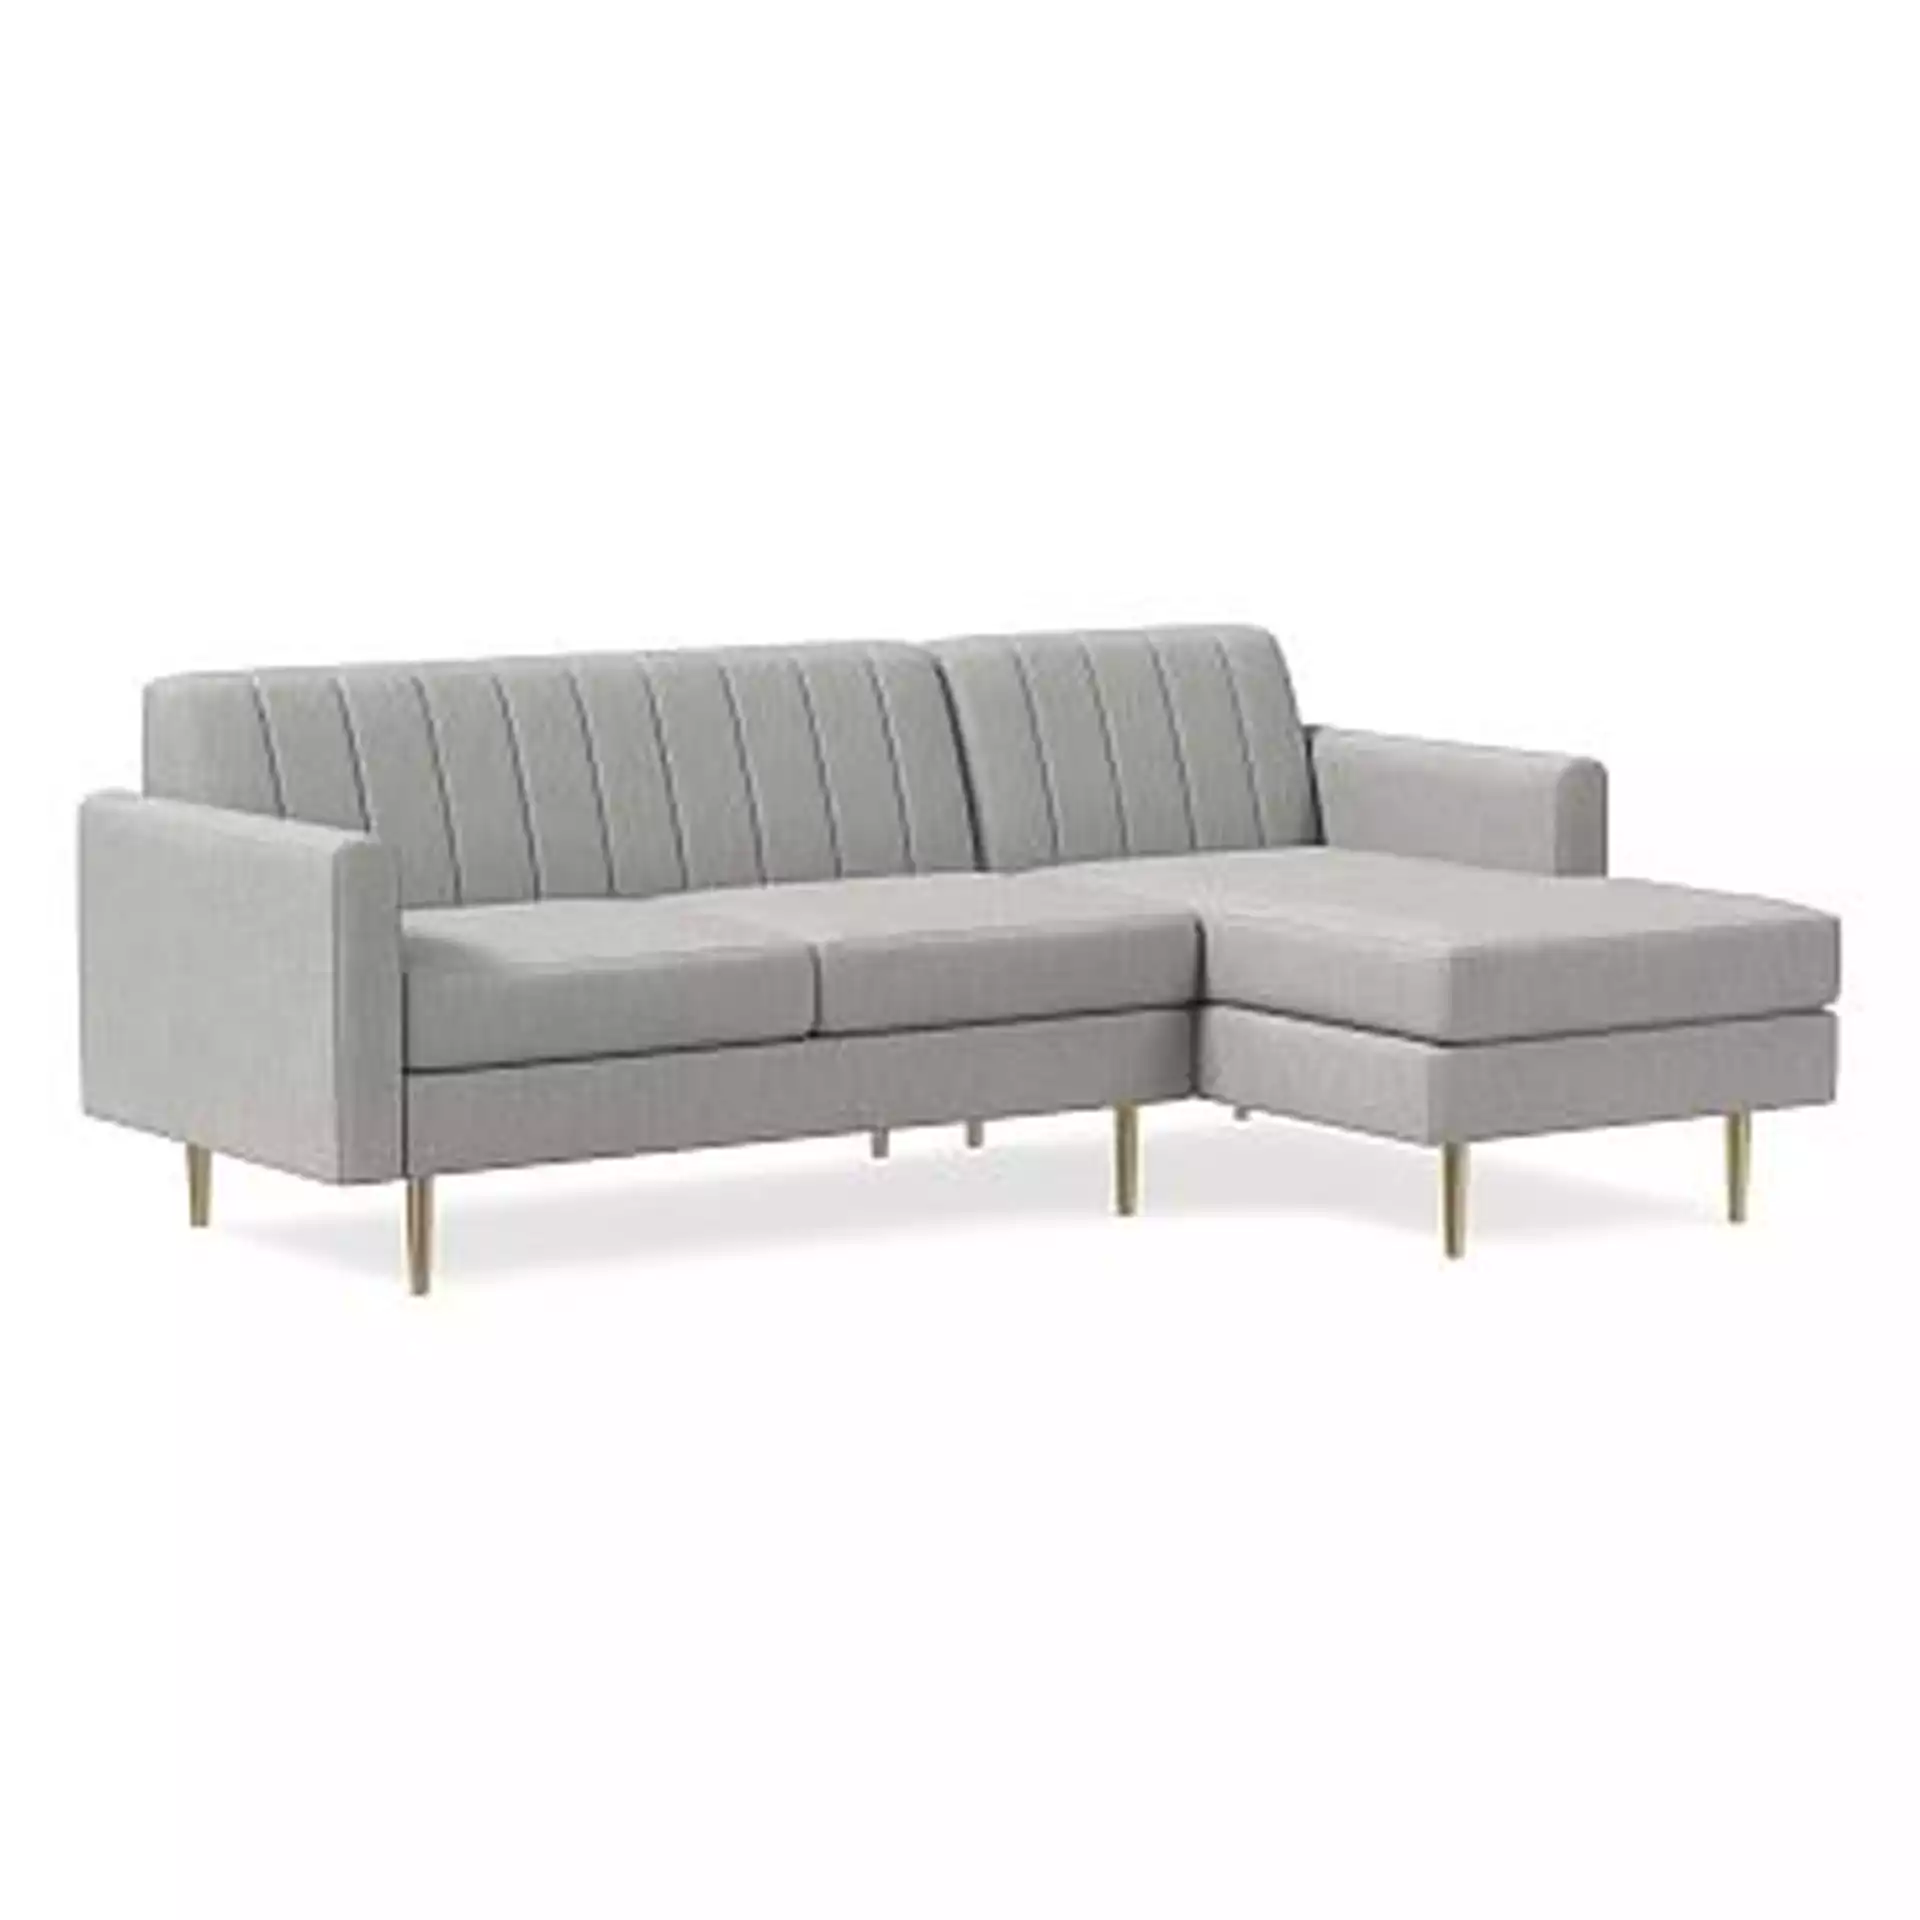 Olive Sectional Set 01: Olive Channel Back Mailbox Arm LA Sofa, Olive Channel Back Mailbox Arm RA Chaise, Poly, Performance Coastal Linen, Storm Gray, Antique Brass